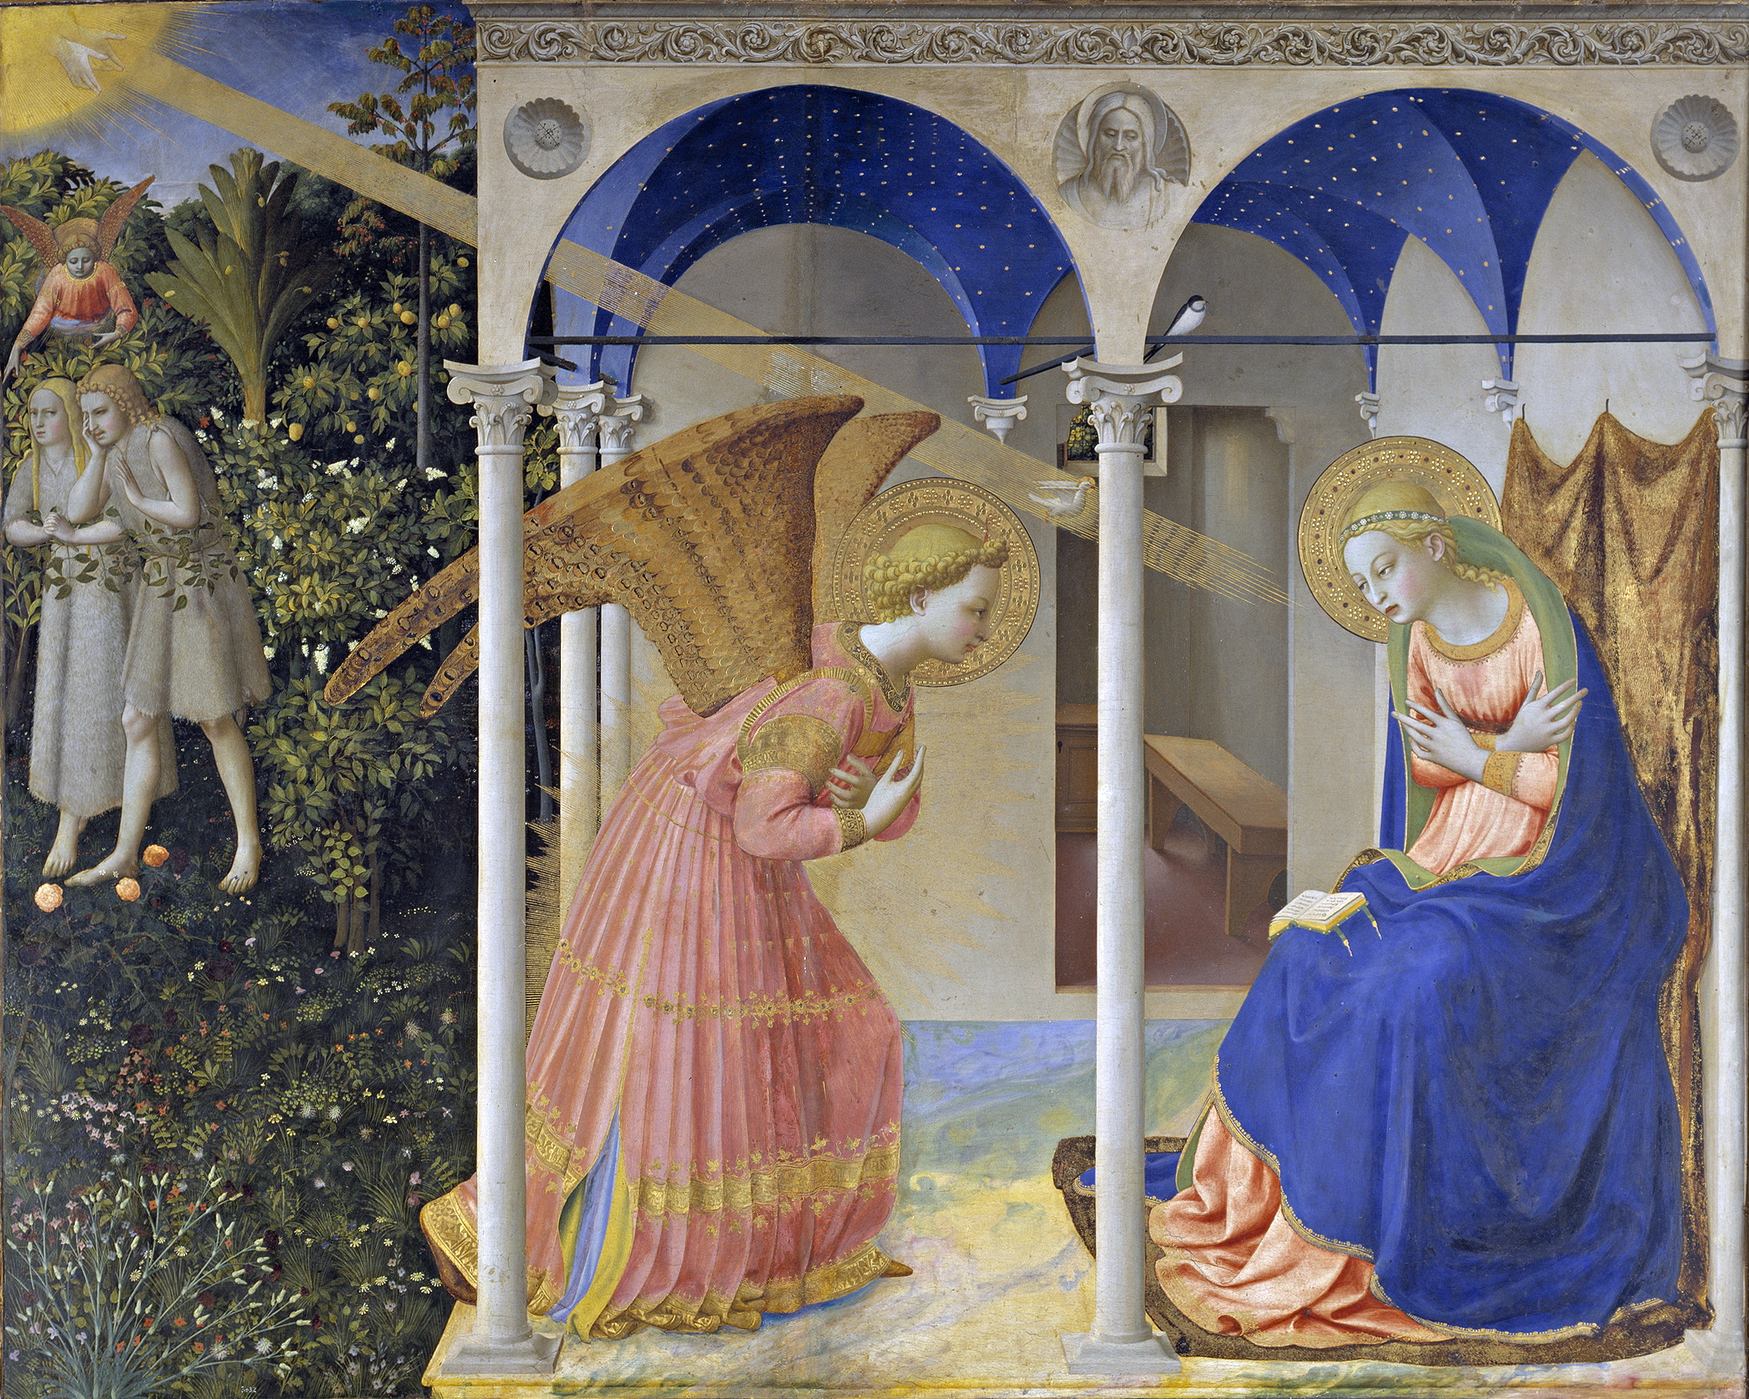 THE ANNUNCIATION, BY FRA ANGELICO